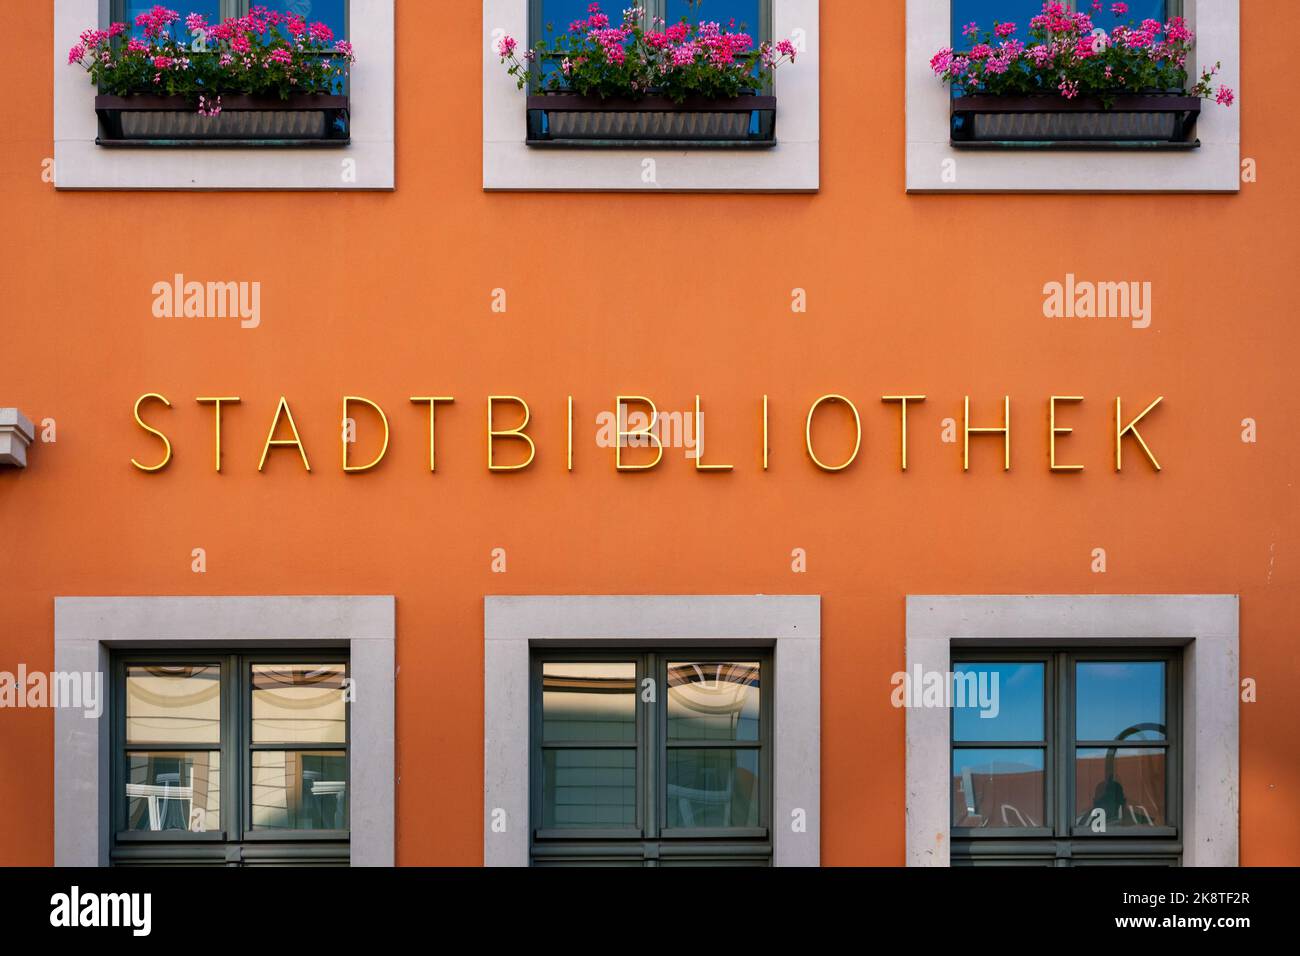 Stadtbibliothek (public library) lettering on the building exterior. Golden letters on an orange facade. A service to borrow books in a city. Stock Photo